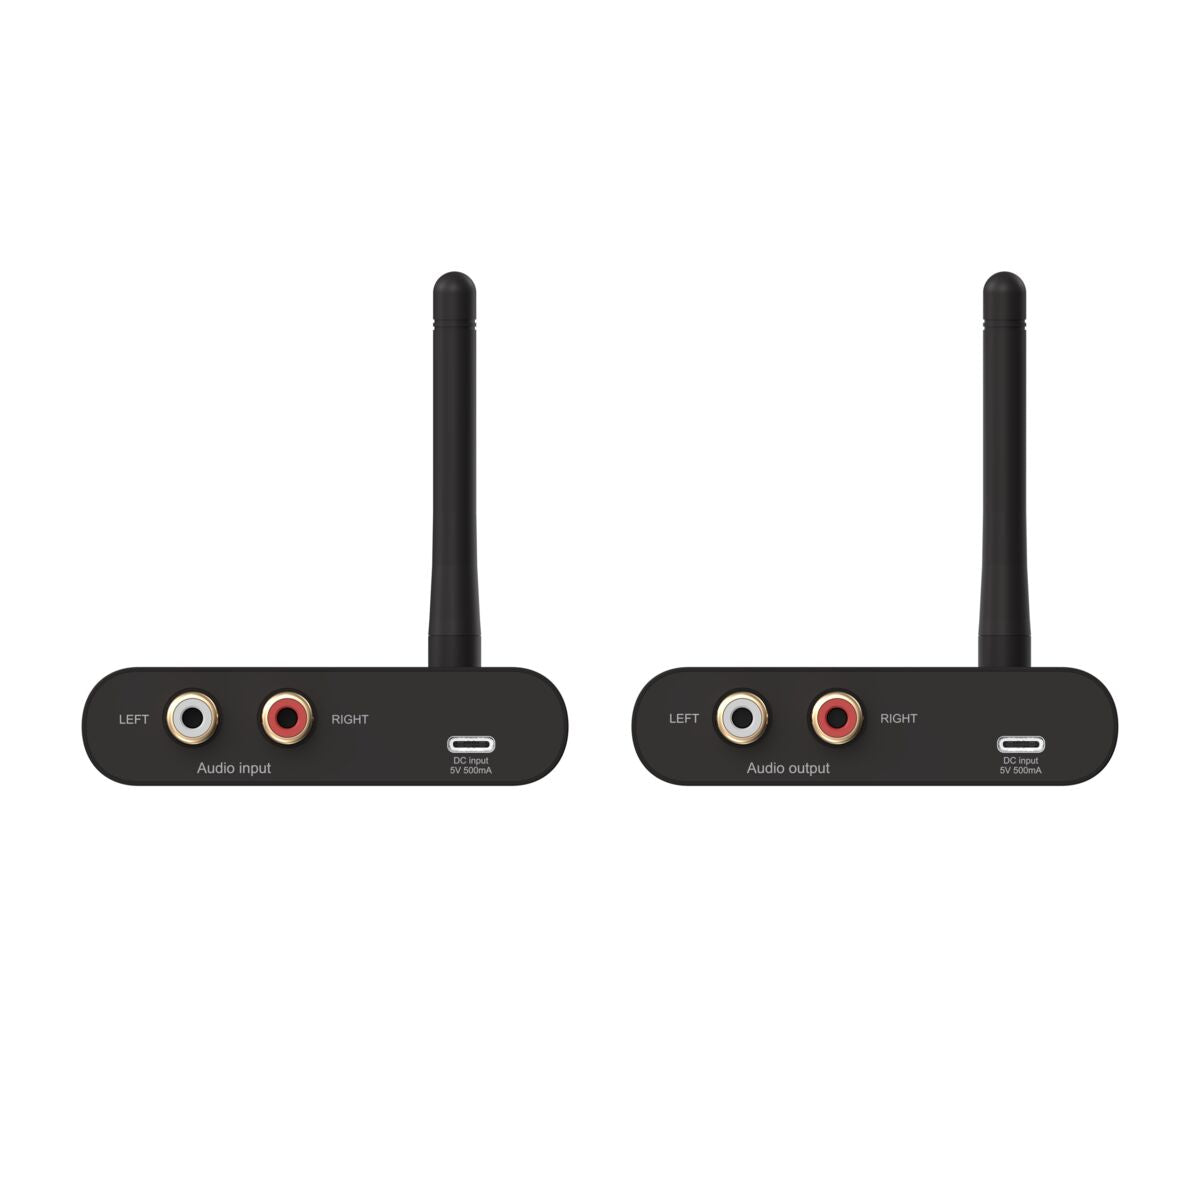 Audio Anywhere 630 - Audio Transmitter - Back View Image Connections | Marmitek